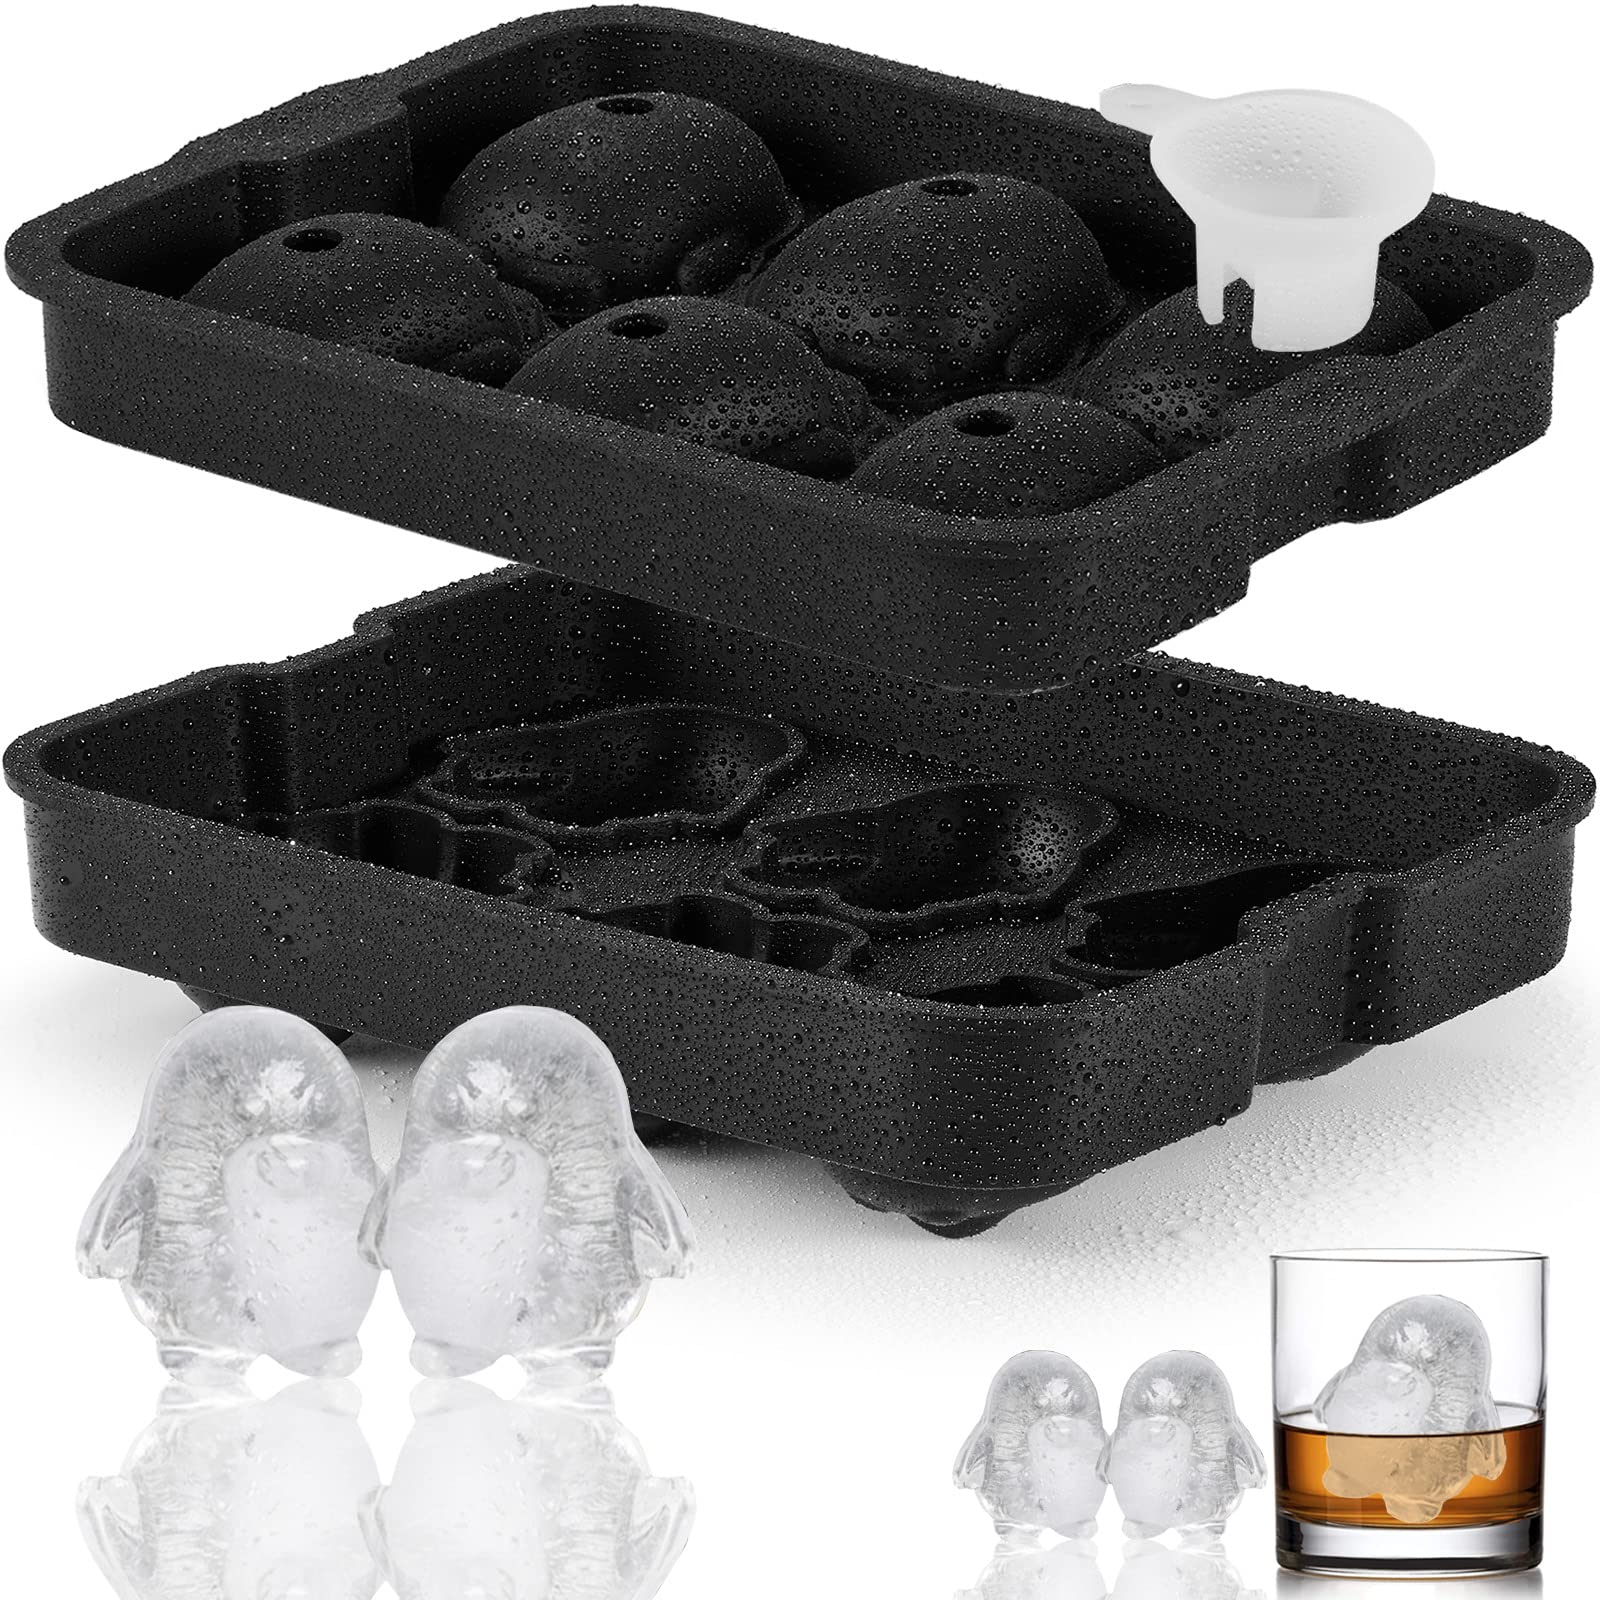 Nax Caki 3D Penguin Ice Cube Tray, 2.2 Large Thicked Silicone Fun Shapes  Whiskey Ice Mold with Funnel for Cocktails,Bourbon,Bra